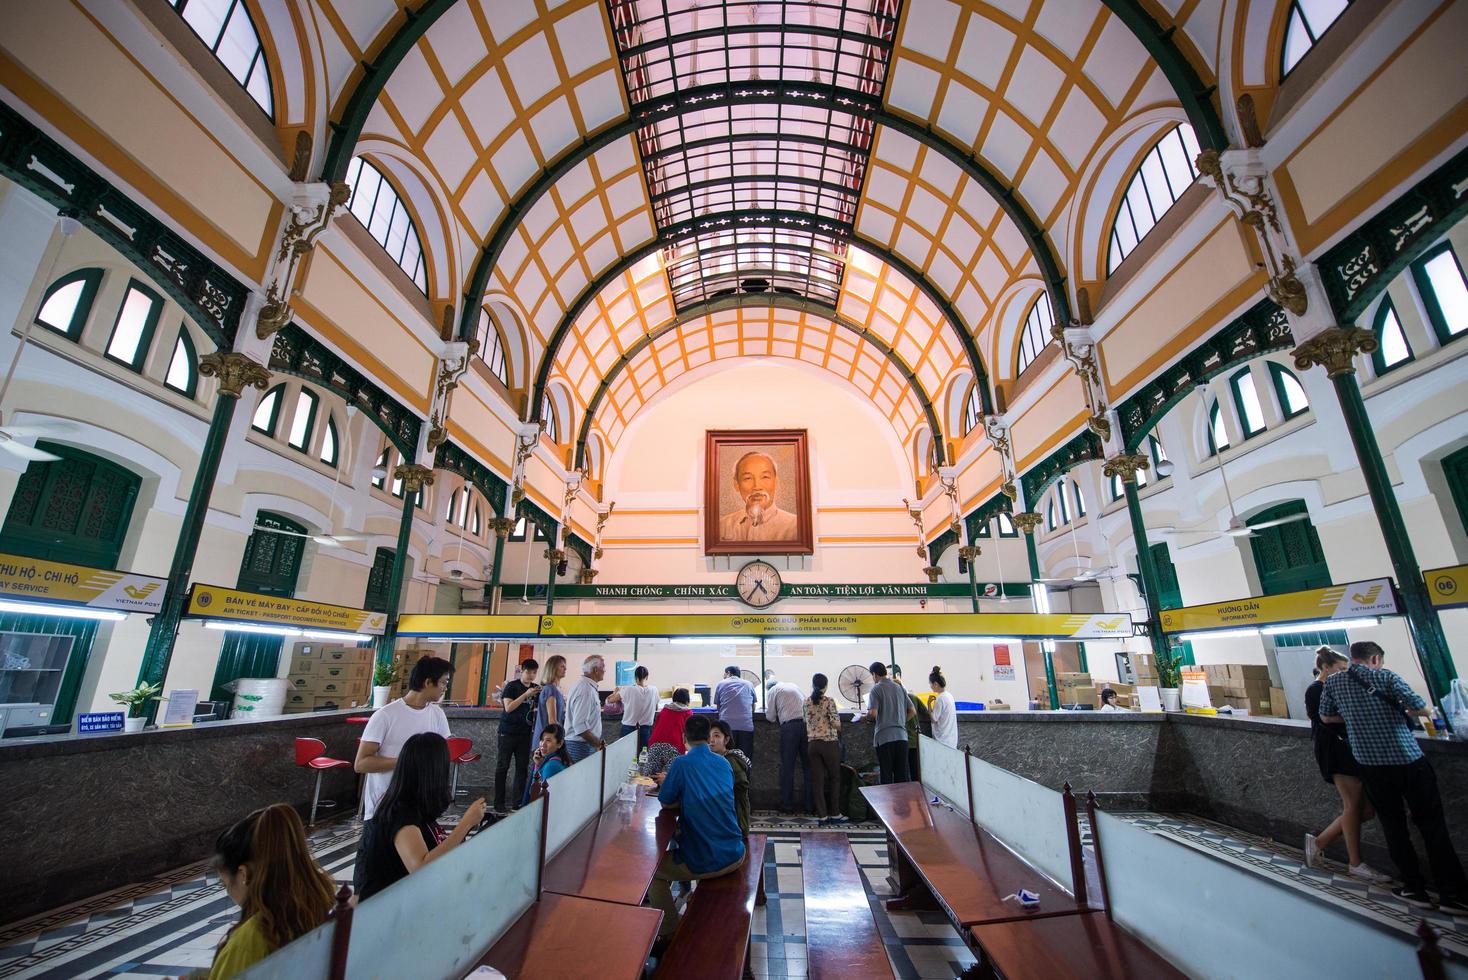 HO CHI MINH CITY, VIETNAM - DEC 11, 2016-Interior of Saigon center post office which have over 130 years history on December 11, 2016. Ho Chi Minh is the biggest city in Southern of Vietnam photo